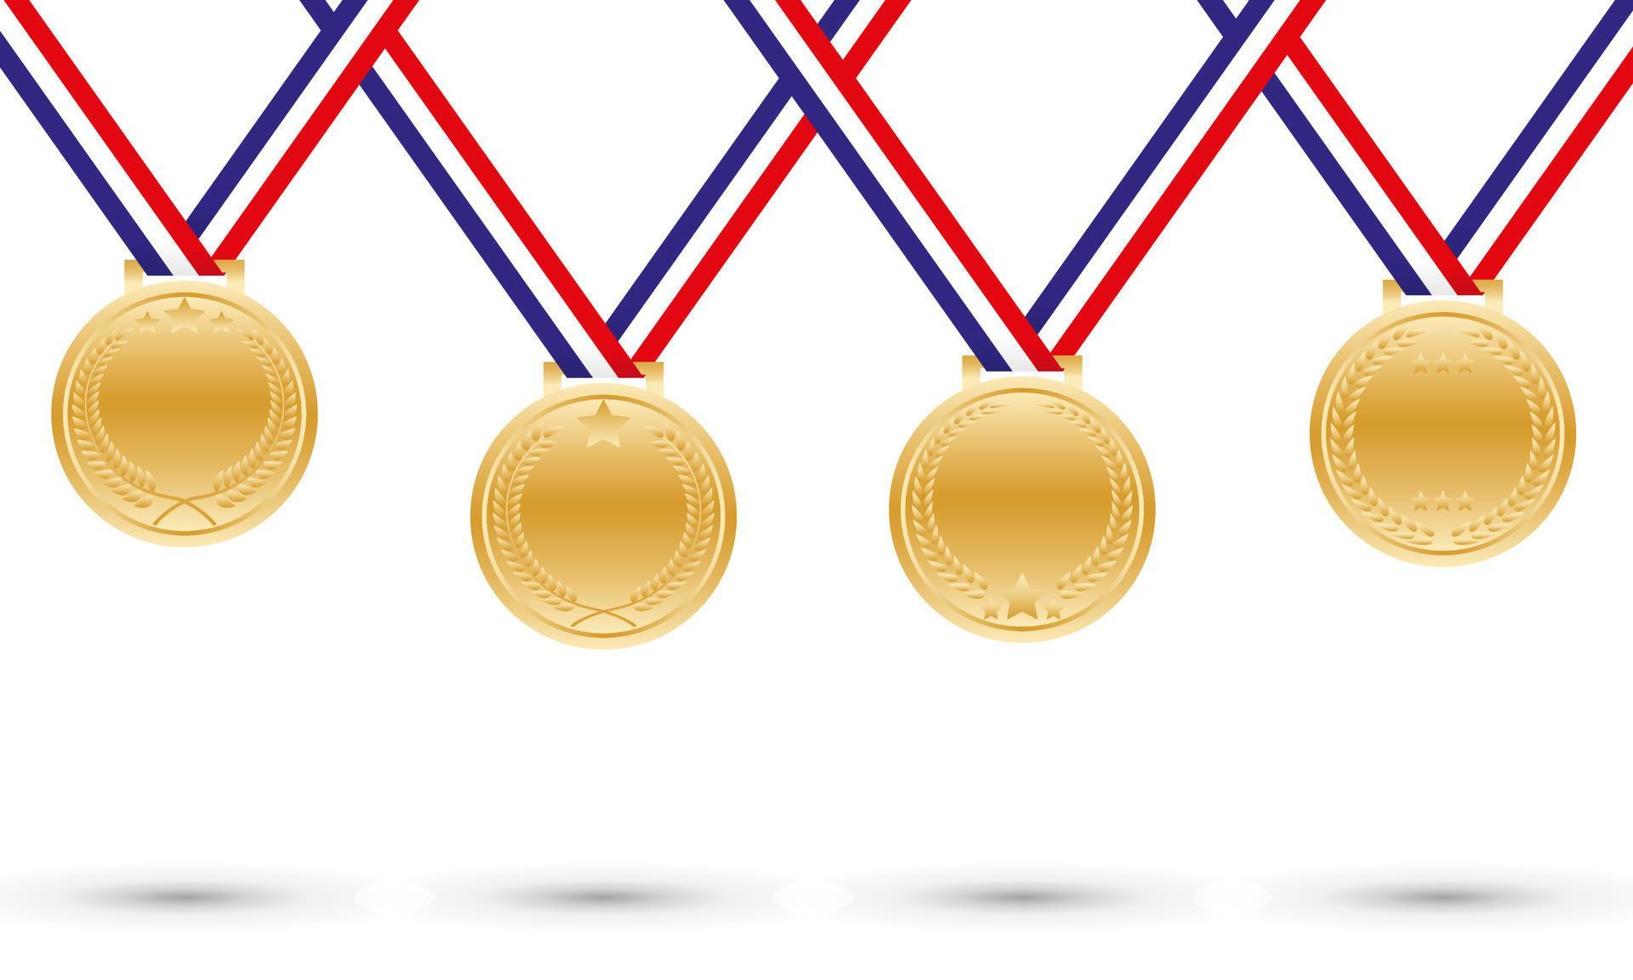 blank golden medal with various ornament by vector design